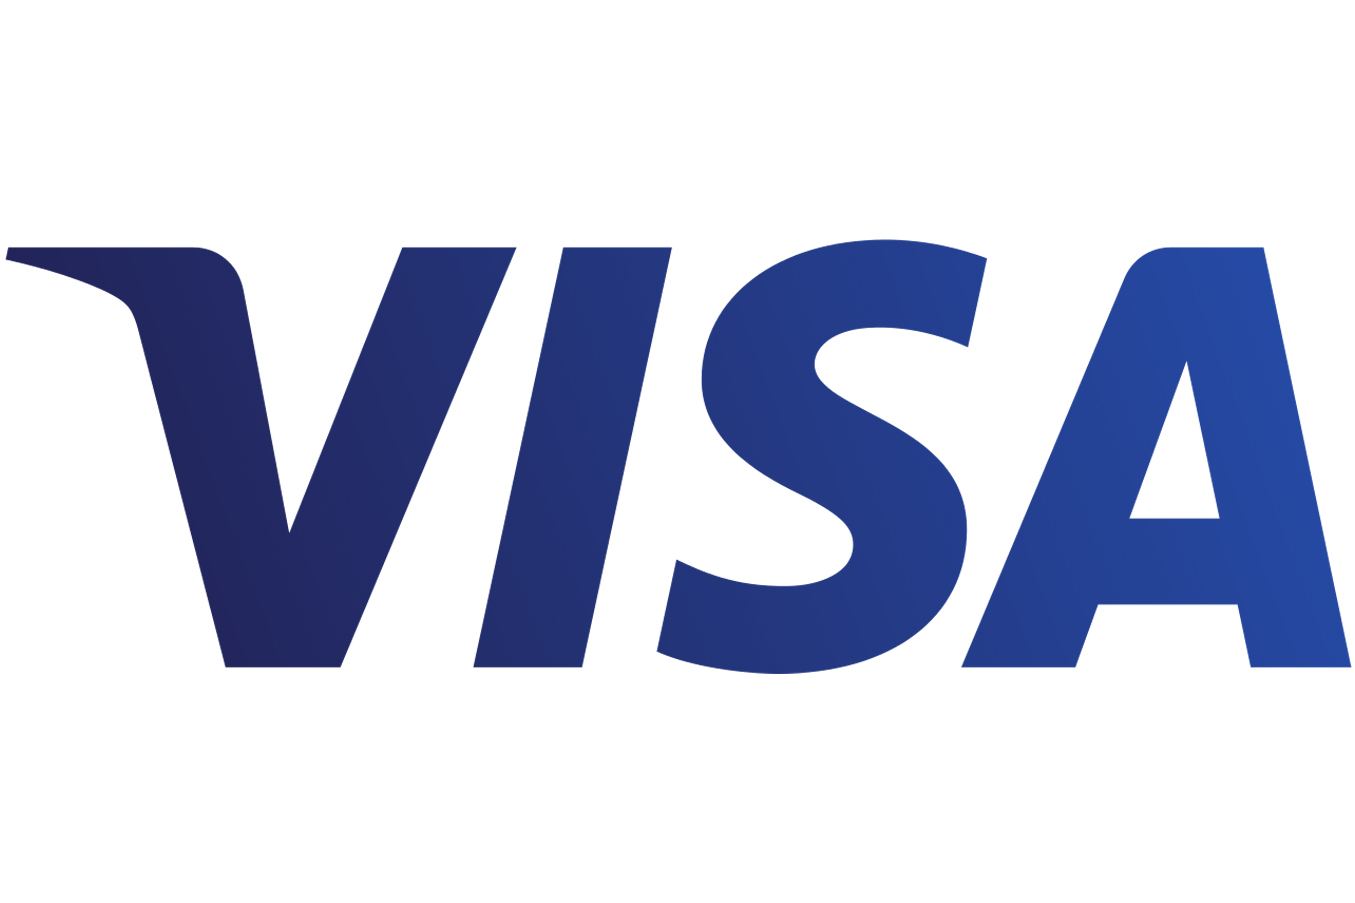 Visa company working to promote contactless payments in Azerbaijan